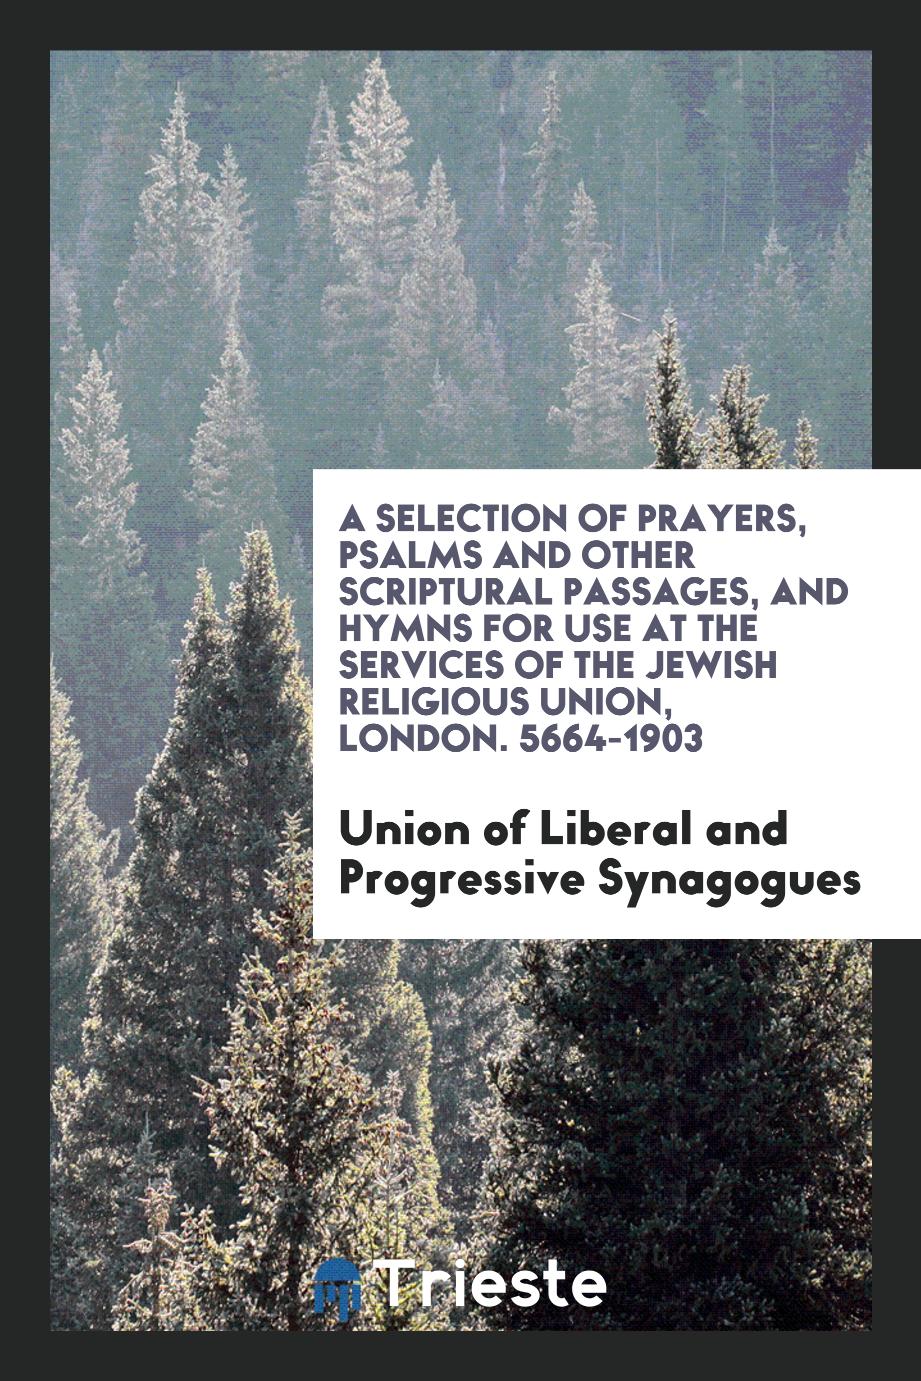 A Selection of Prayers, Psalms and Other Scriptural Passages, and Hymns for Use at the Services of the Jewish Religious Union, London. 5664-1903